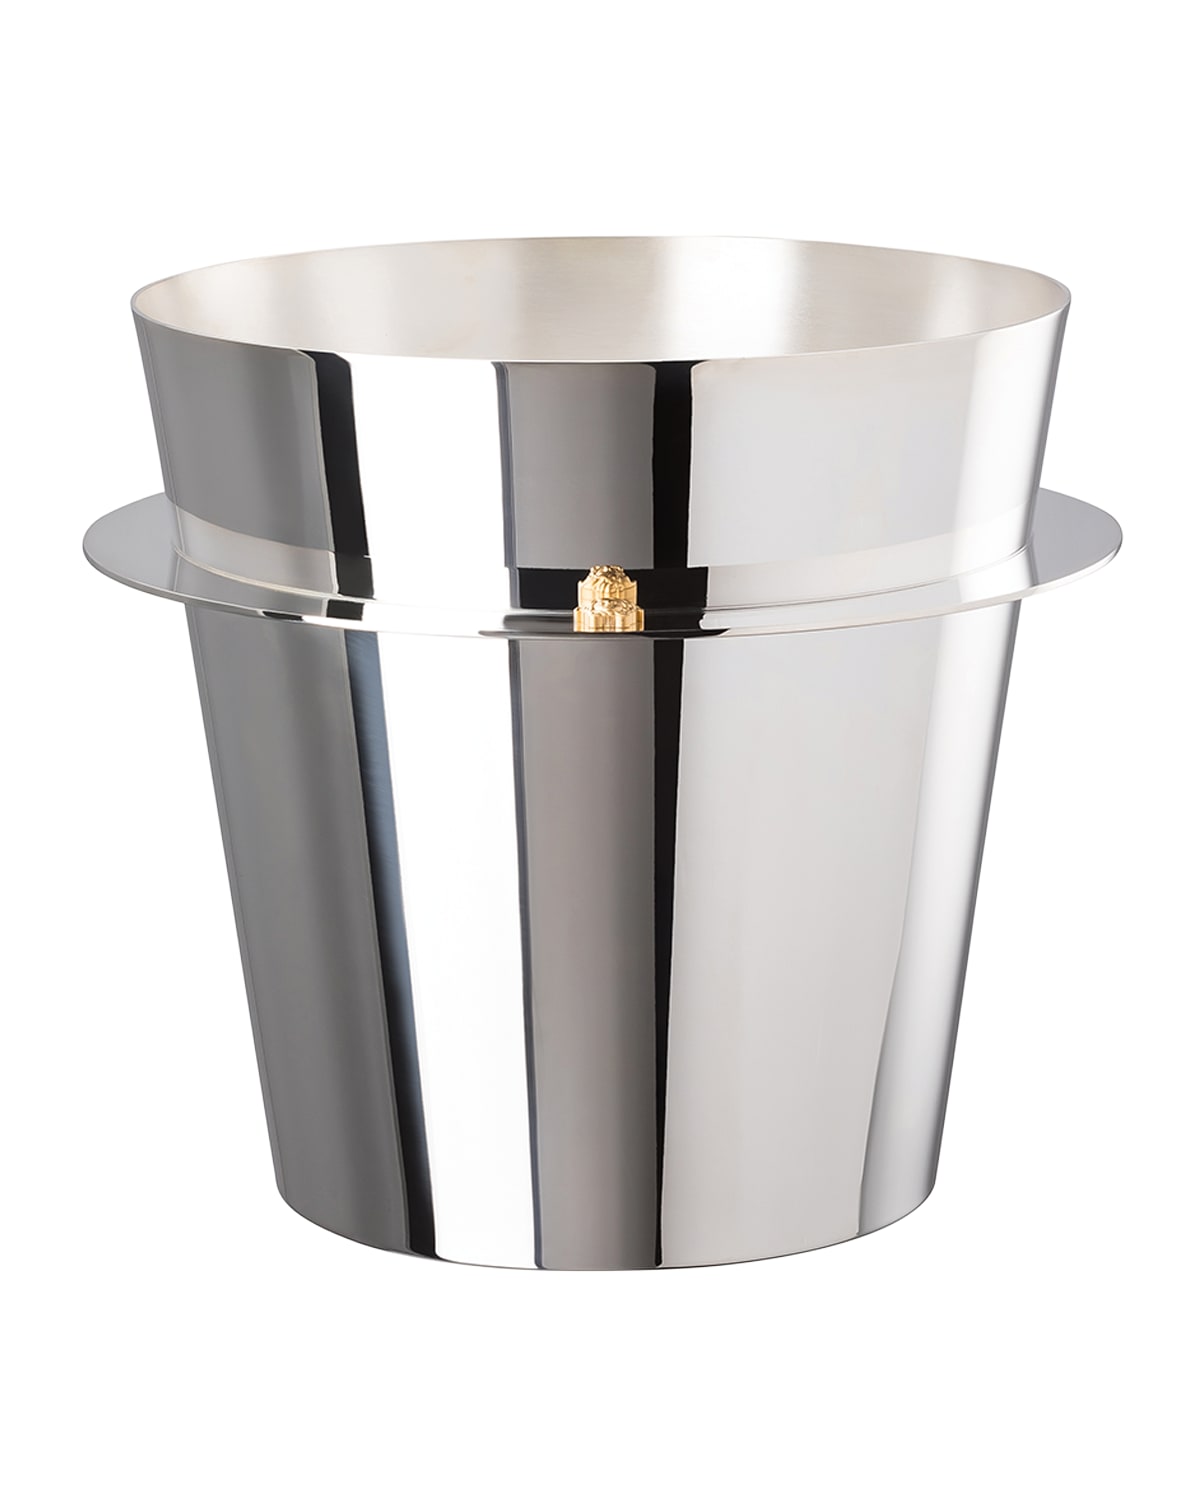 VERSACE STAINLESS STEEL CHAMPAGNE BUCKET - 9.4"